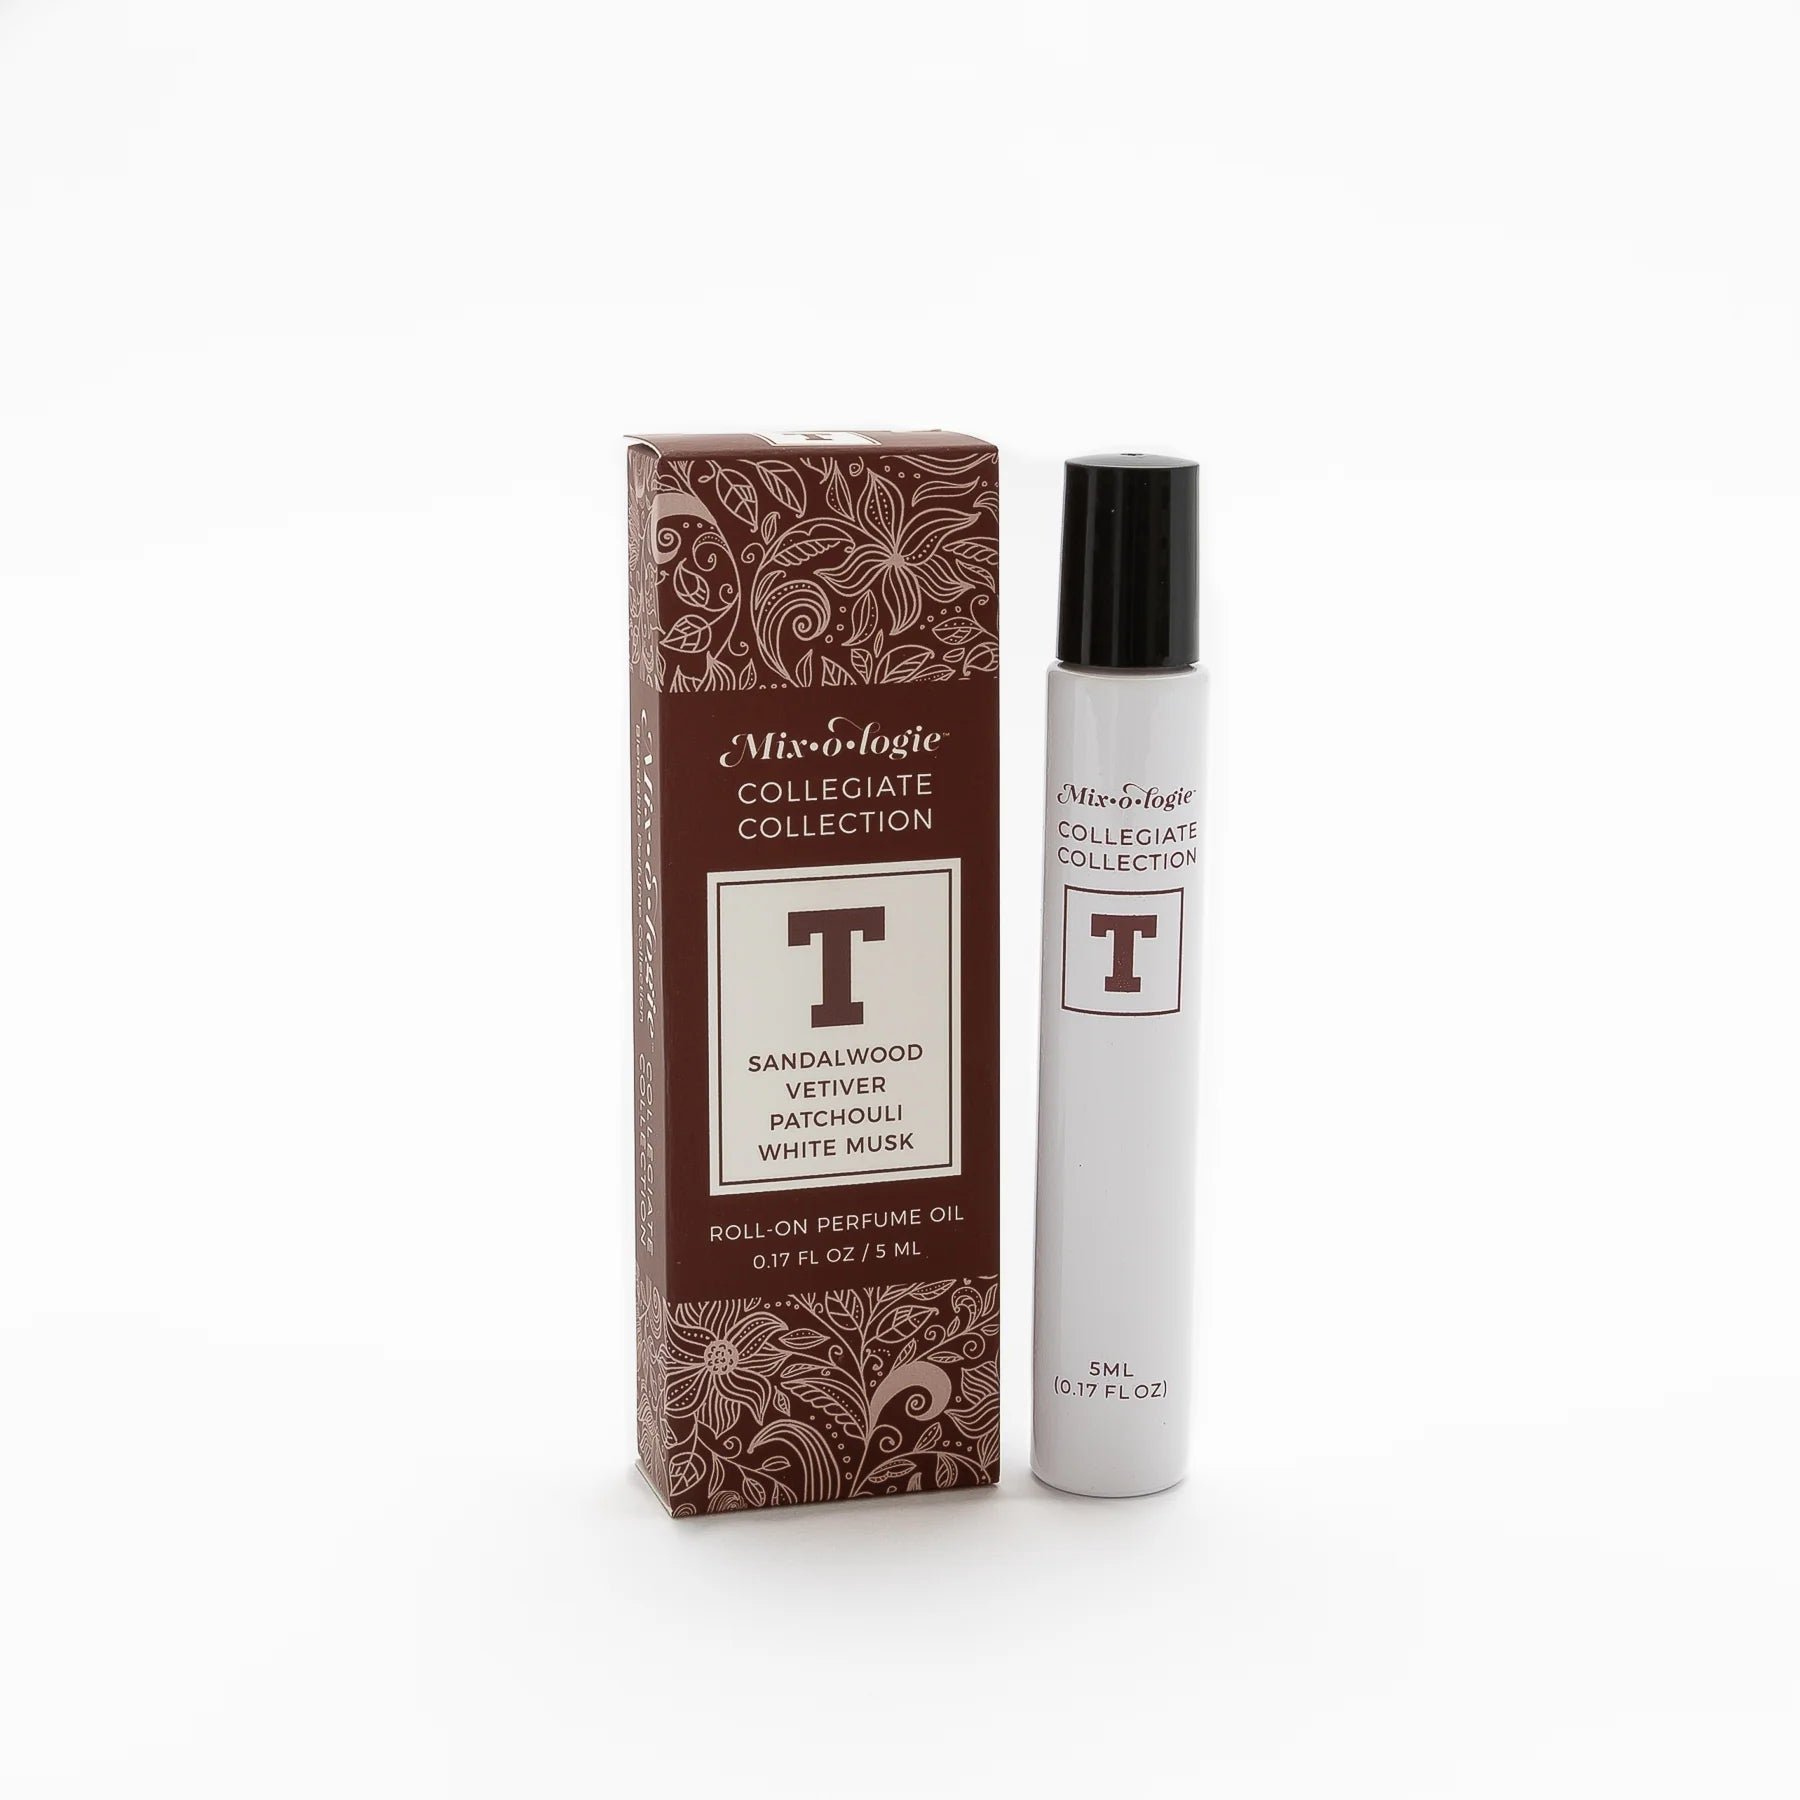 Mixologie - Scent "T" Rollerball Perfume